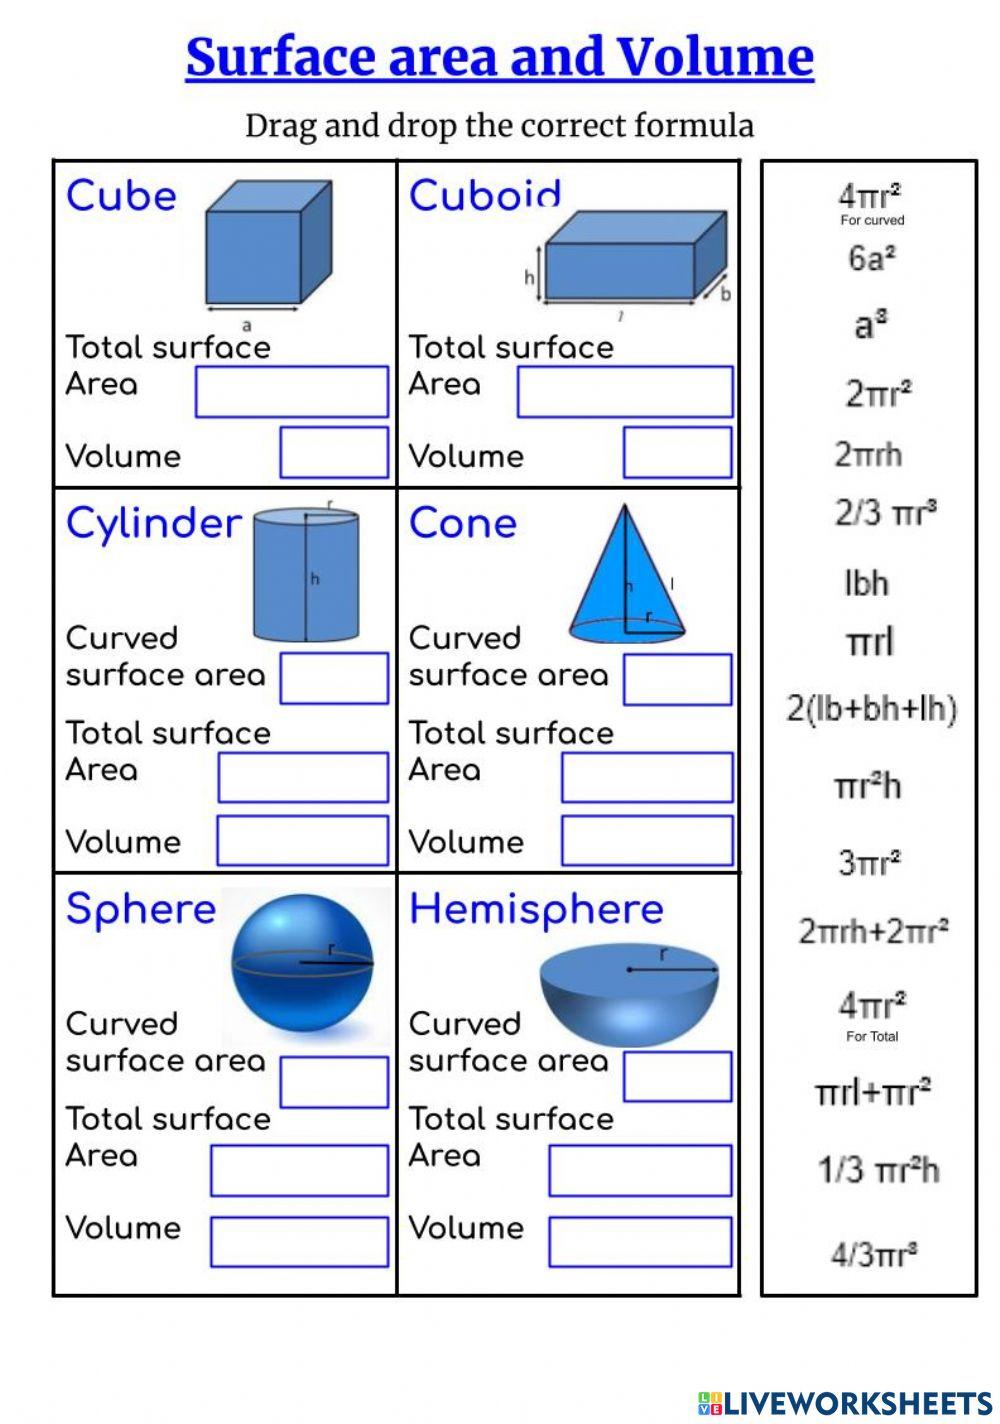 Surface area and Volume